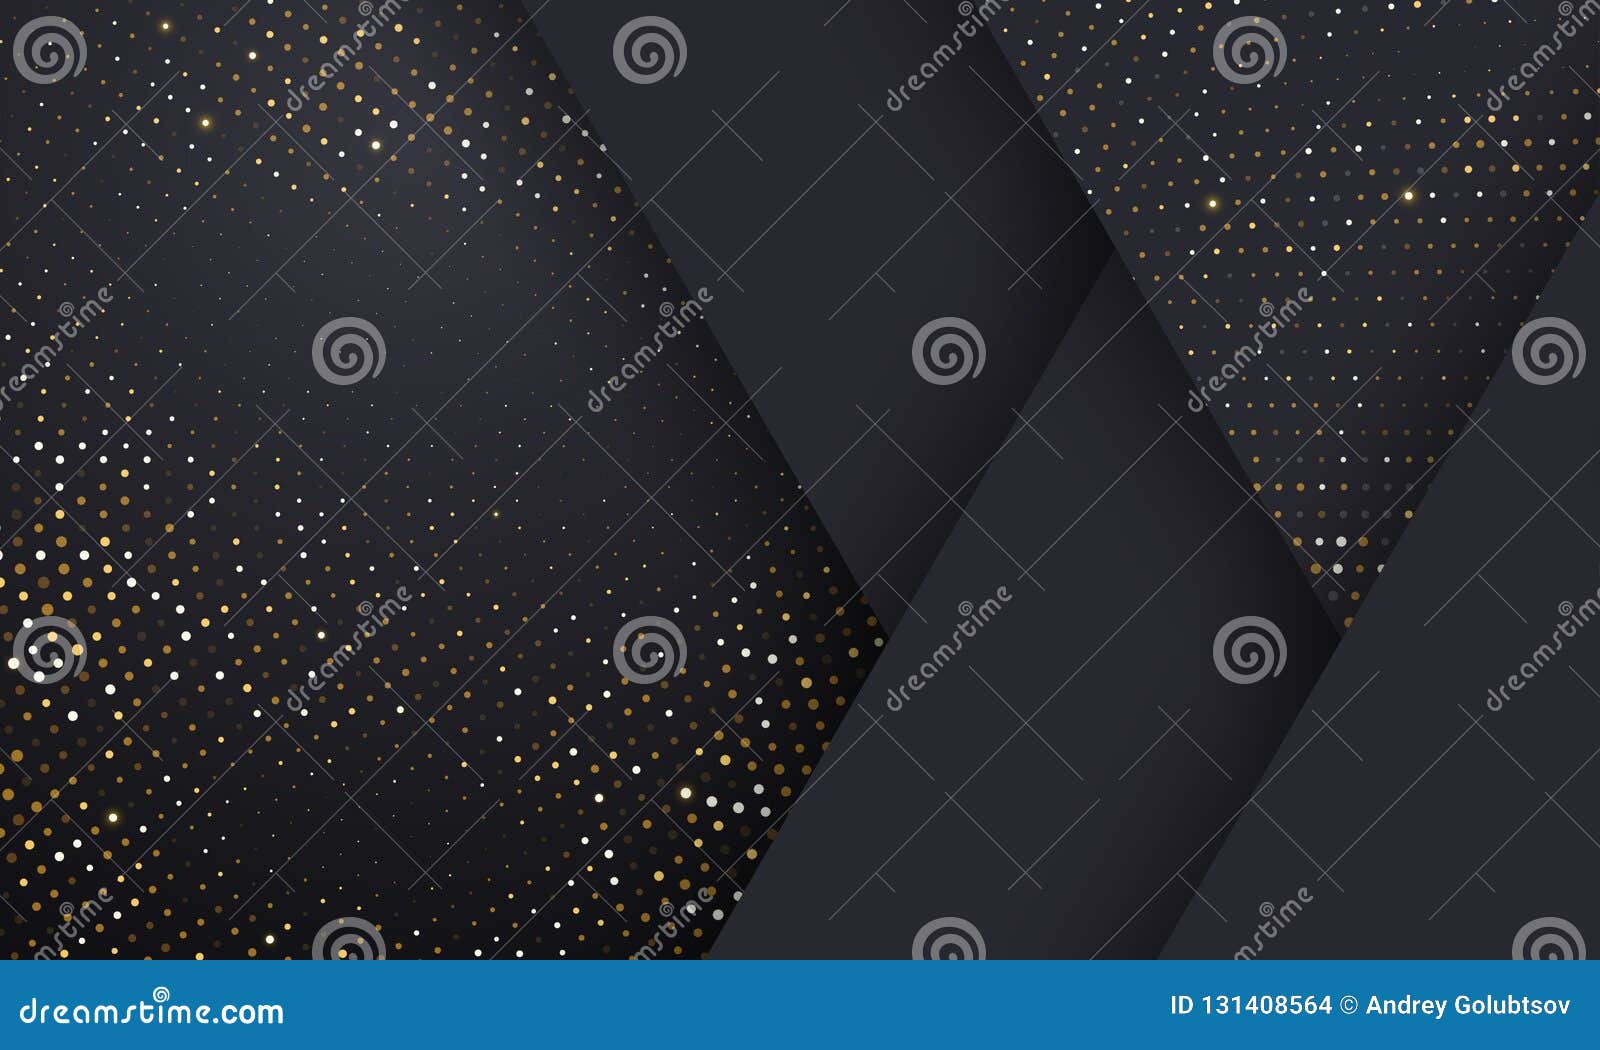 gold and silver halftone pattern geometric black background.  golden glitter dotted sparkles or halftone shine texture